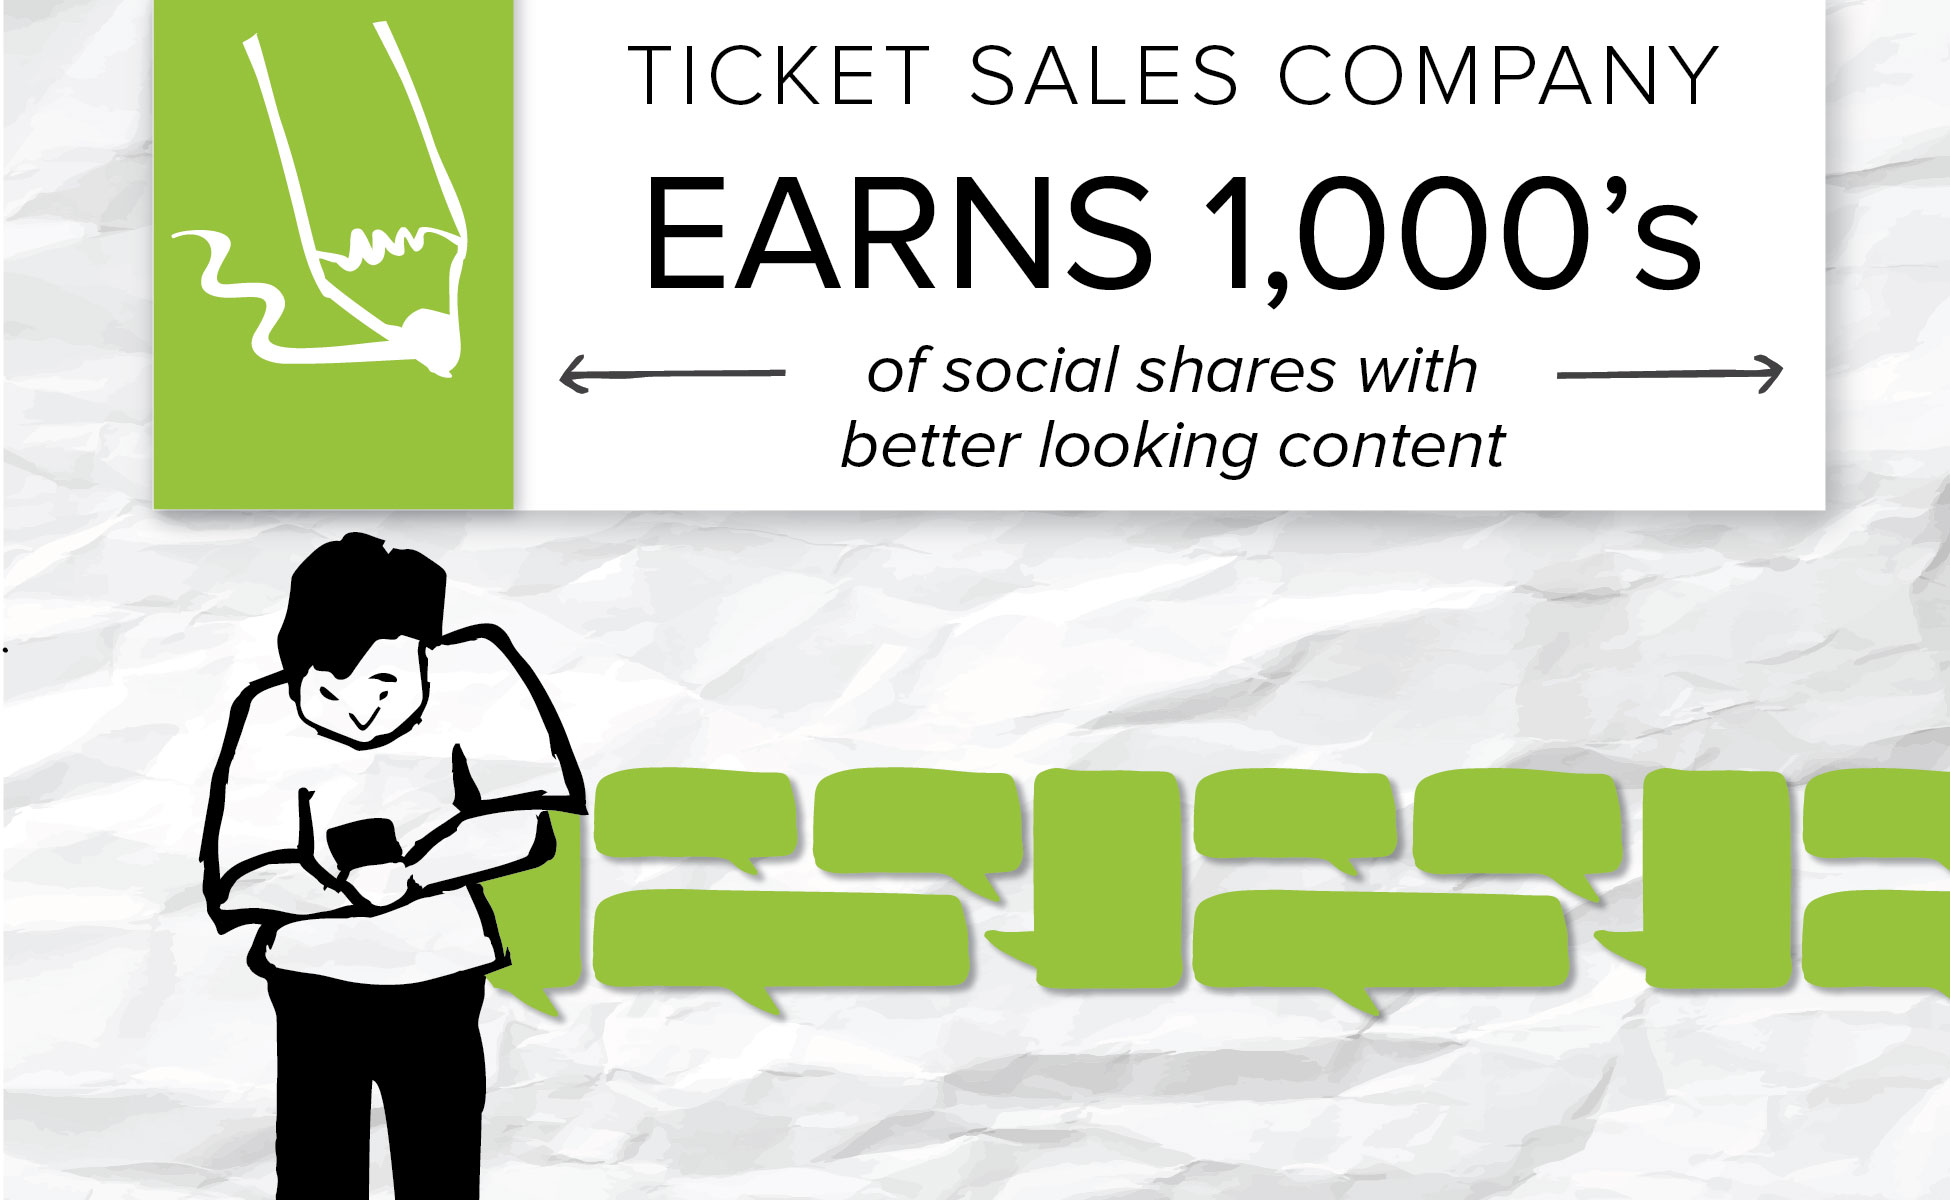 A visual content marketing strategy helps a ticket sales company generate thousands of social shares.